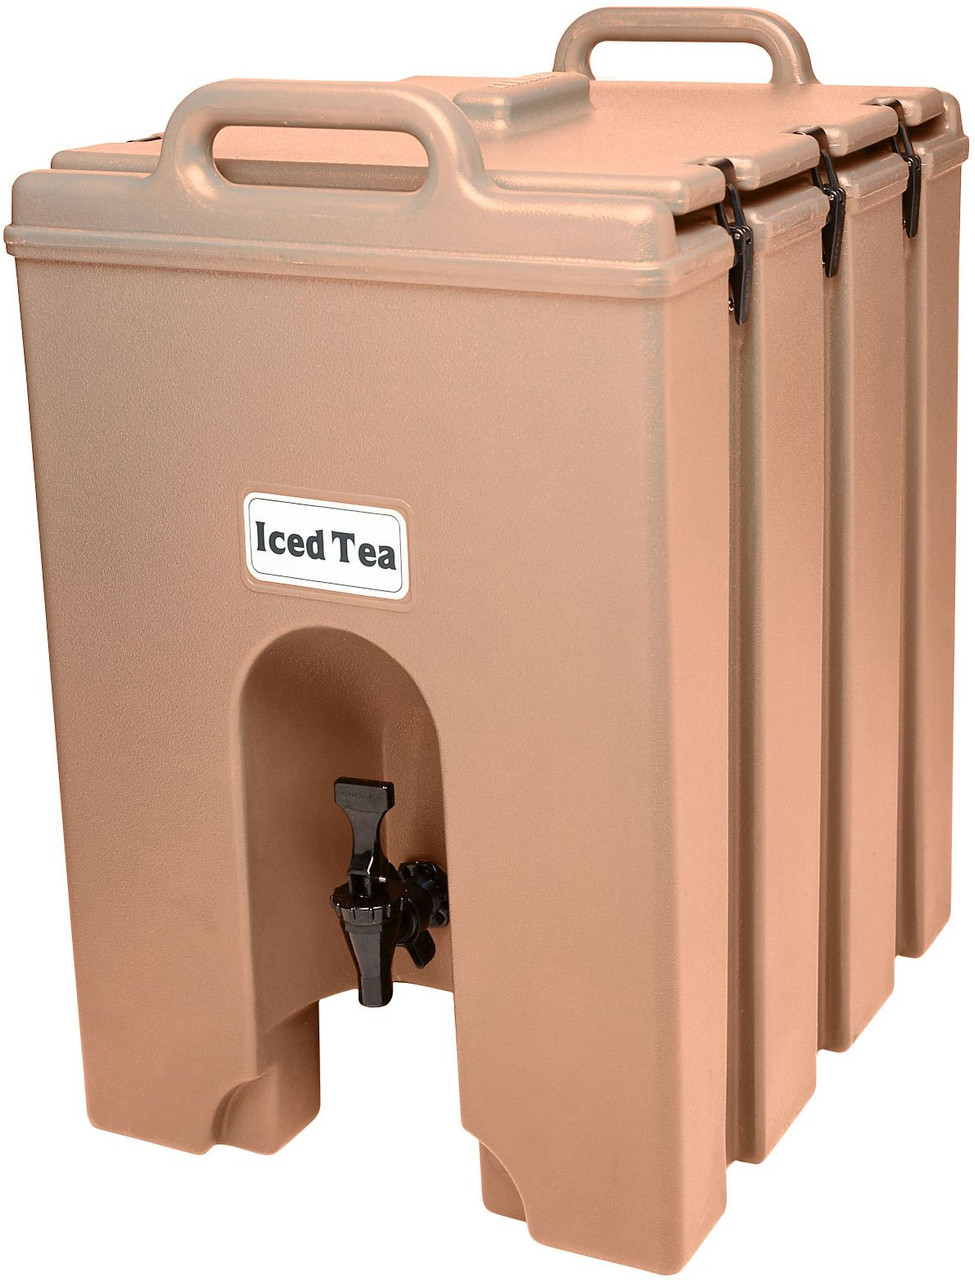 Cambro 1000LCD157 11.75 Gallon Camtainer Beverage Carrier - Beige